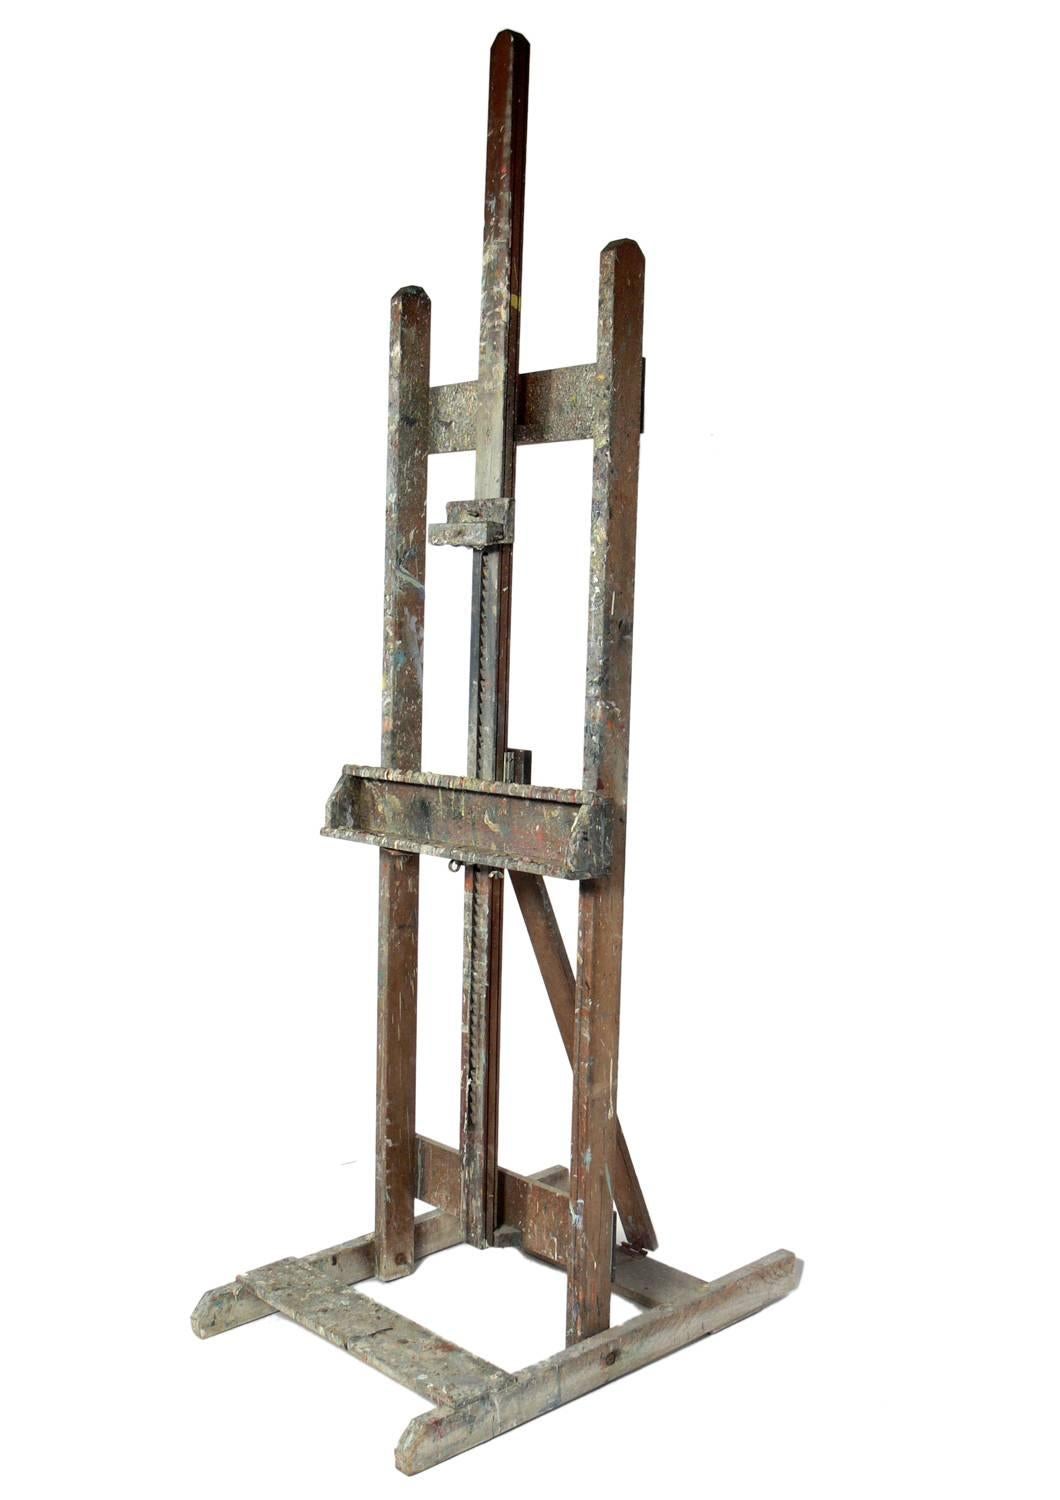 Vintage Artist's Easel, American, circa 1950s. This easel is a versatile piece and can be used for it's intended purpose, as an easel, or to display a work of art, or hold a flat screen television. The easel retains it's wonderful original patina